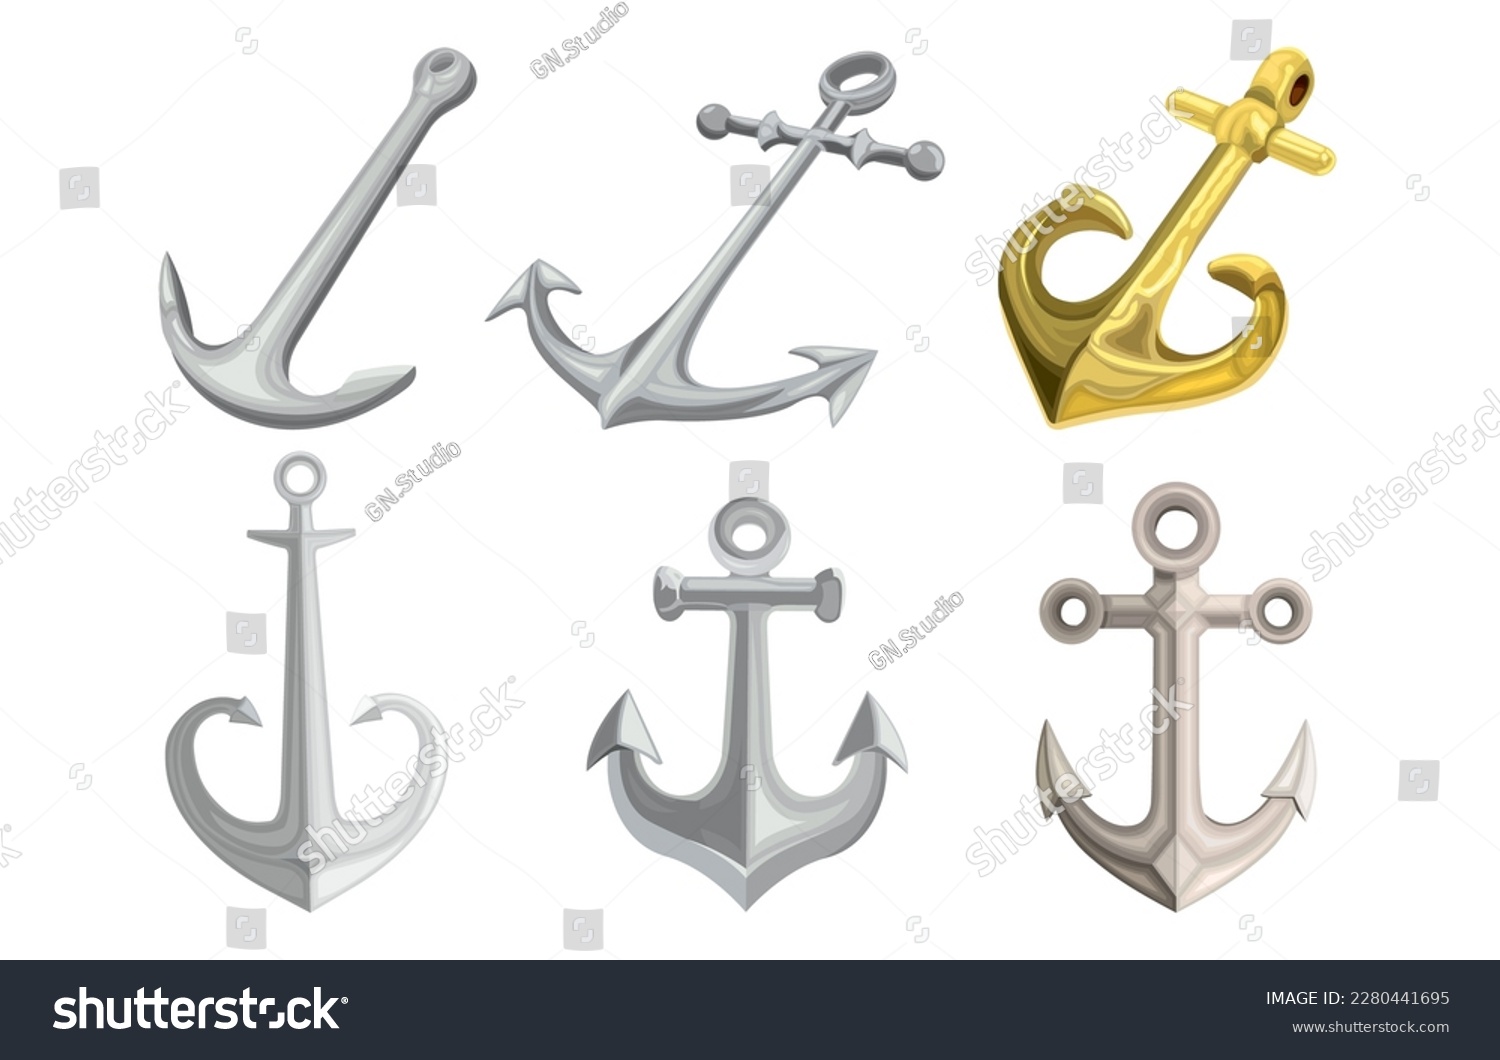 SVG of Set of types of steel antique Anchor icons. Ship anchors various collection. Golden and silver Anchors logo in different shapes isolated on white background. Web images for button. Vector illustration svg